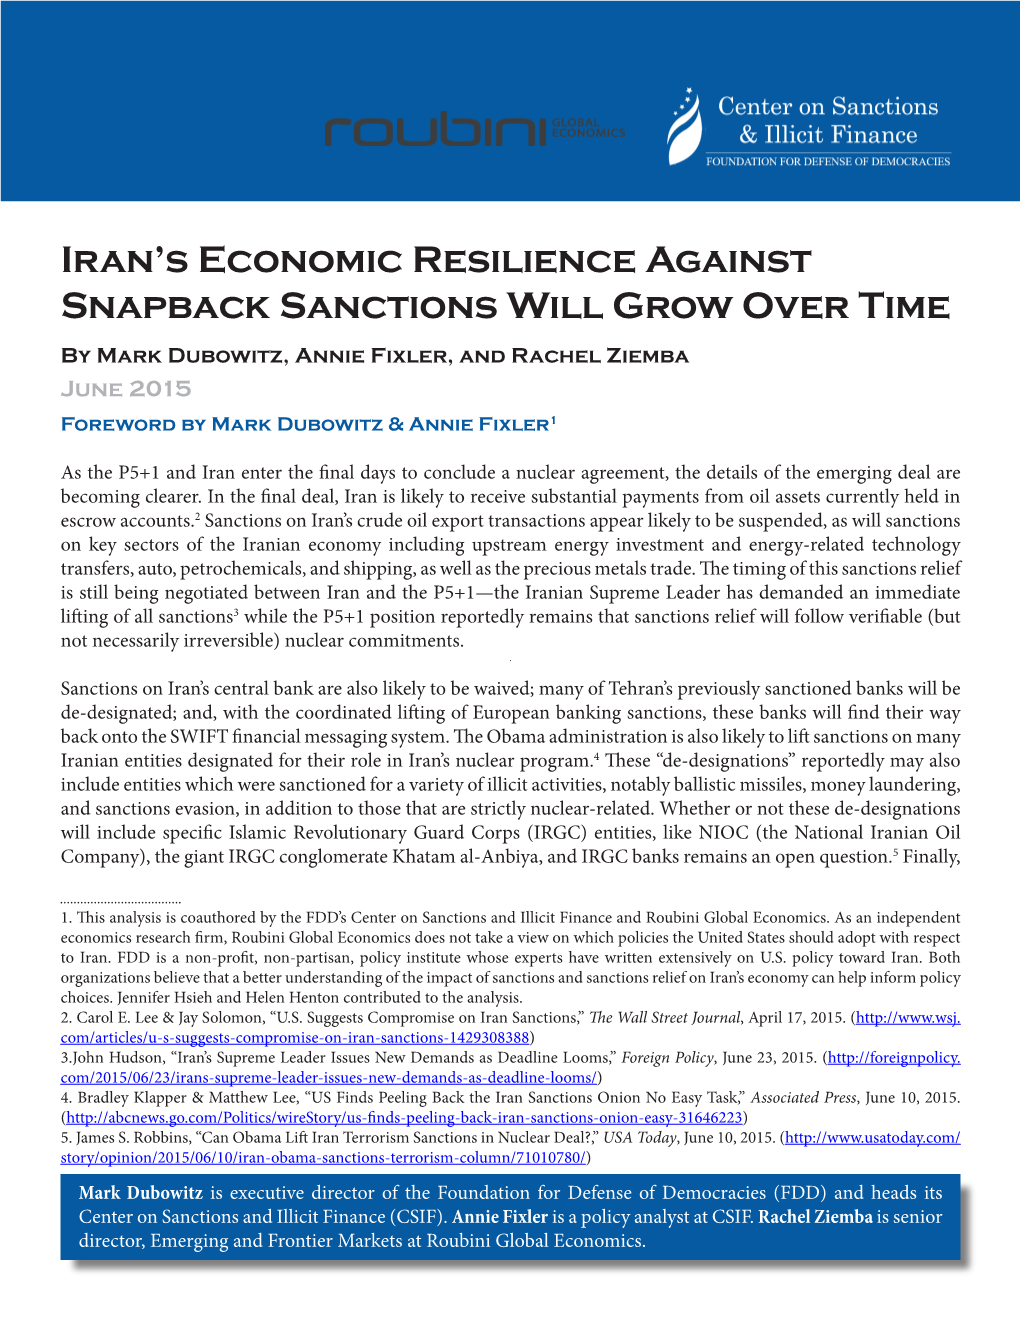 Iran's Economic Resilience Against Snapback Sanctions Will Grow